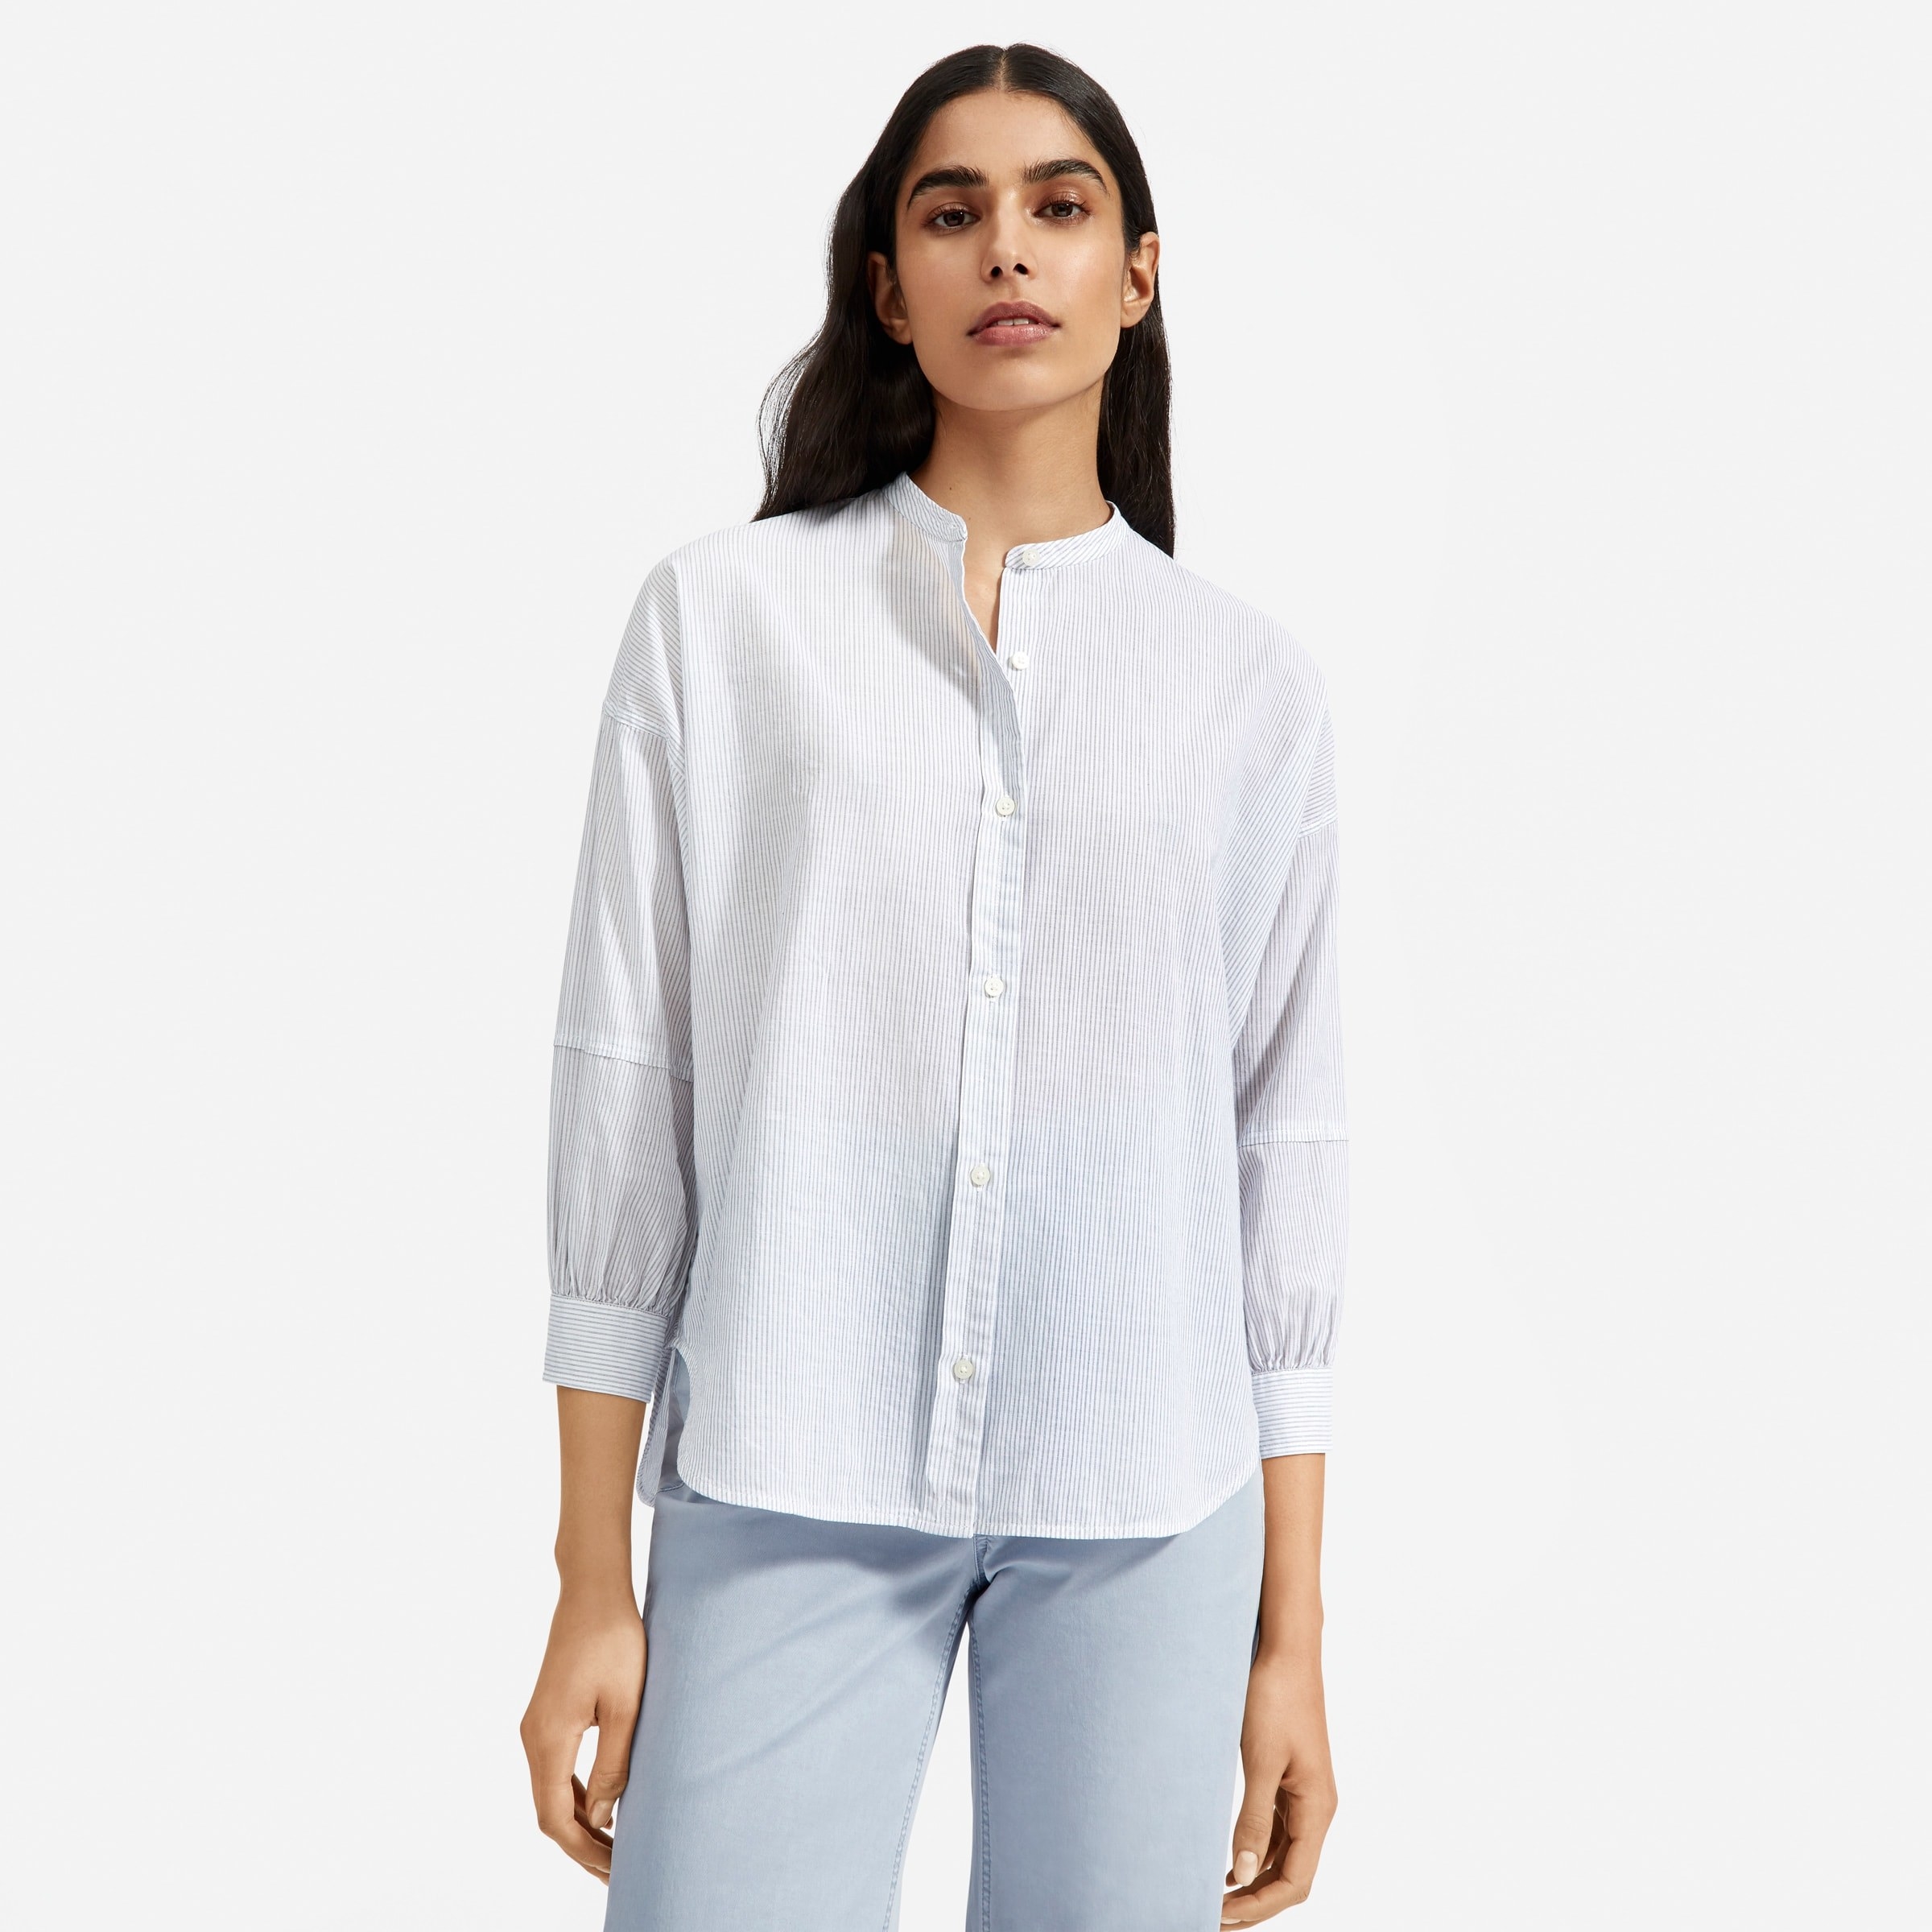 Everlane Has Wardrobe Essentials For Up To 50% Off Right Now